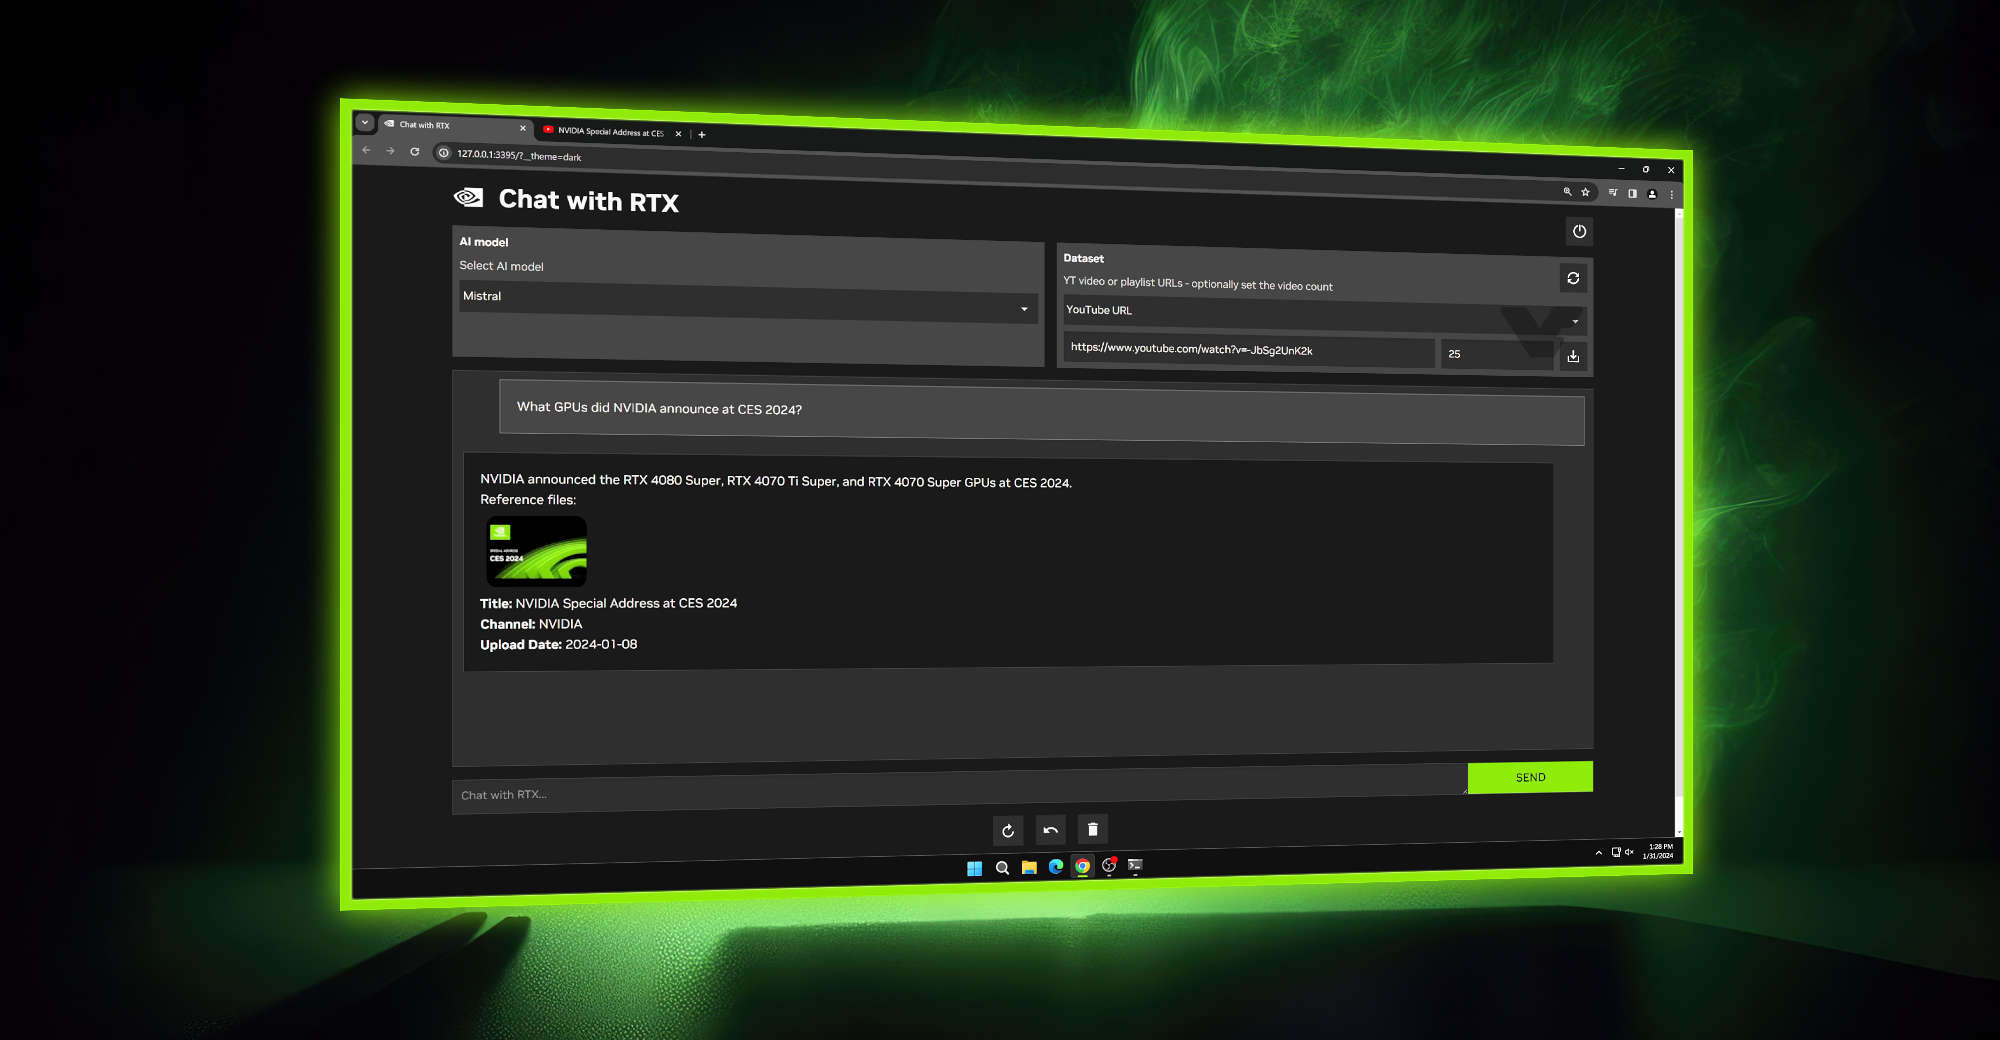 CHAT-WITH-RTX-HERO